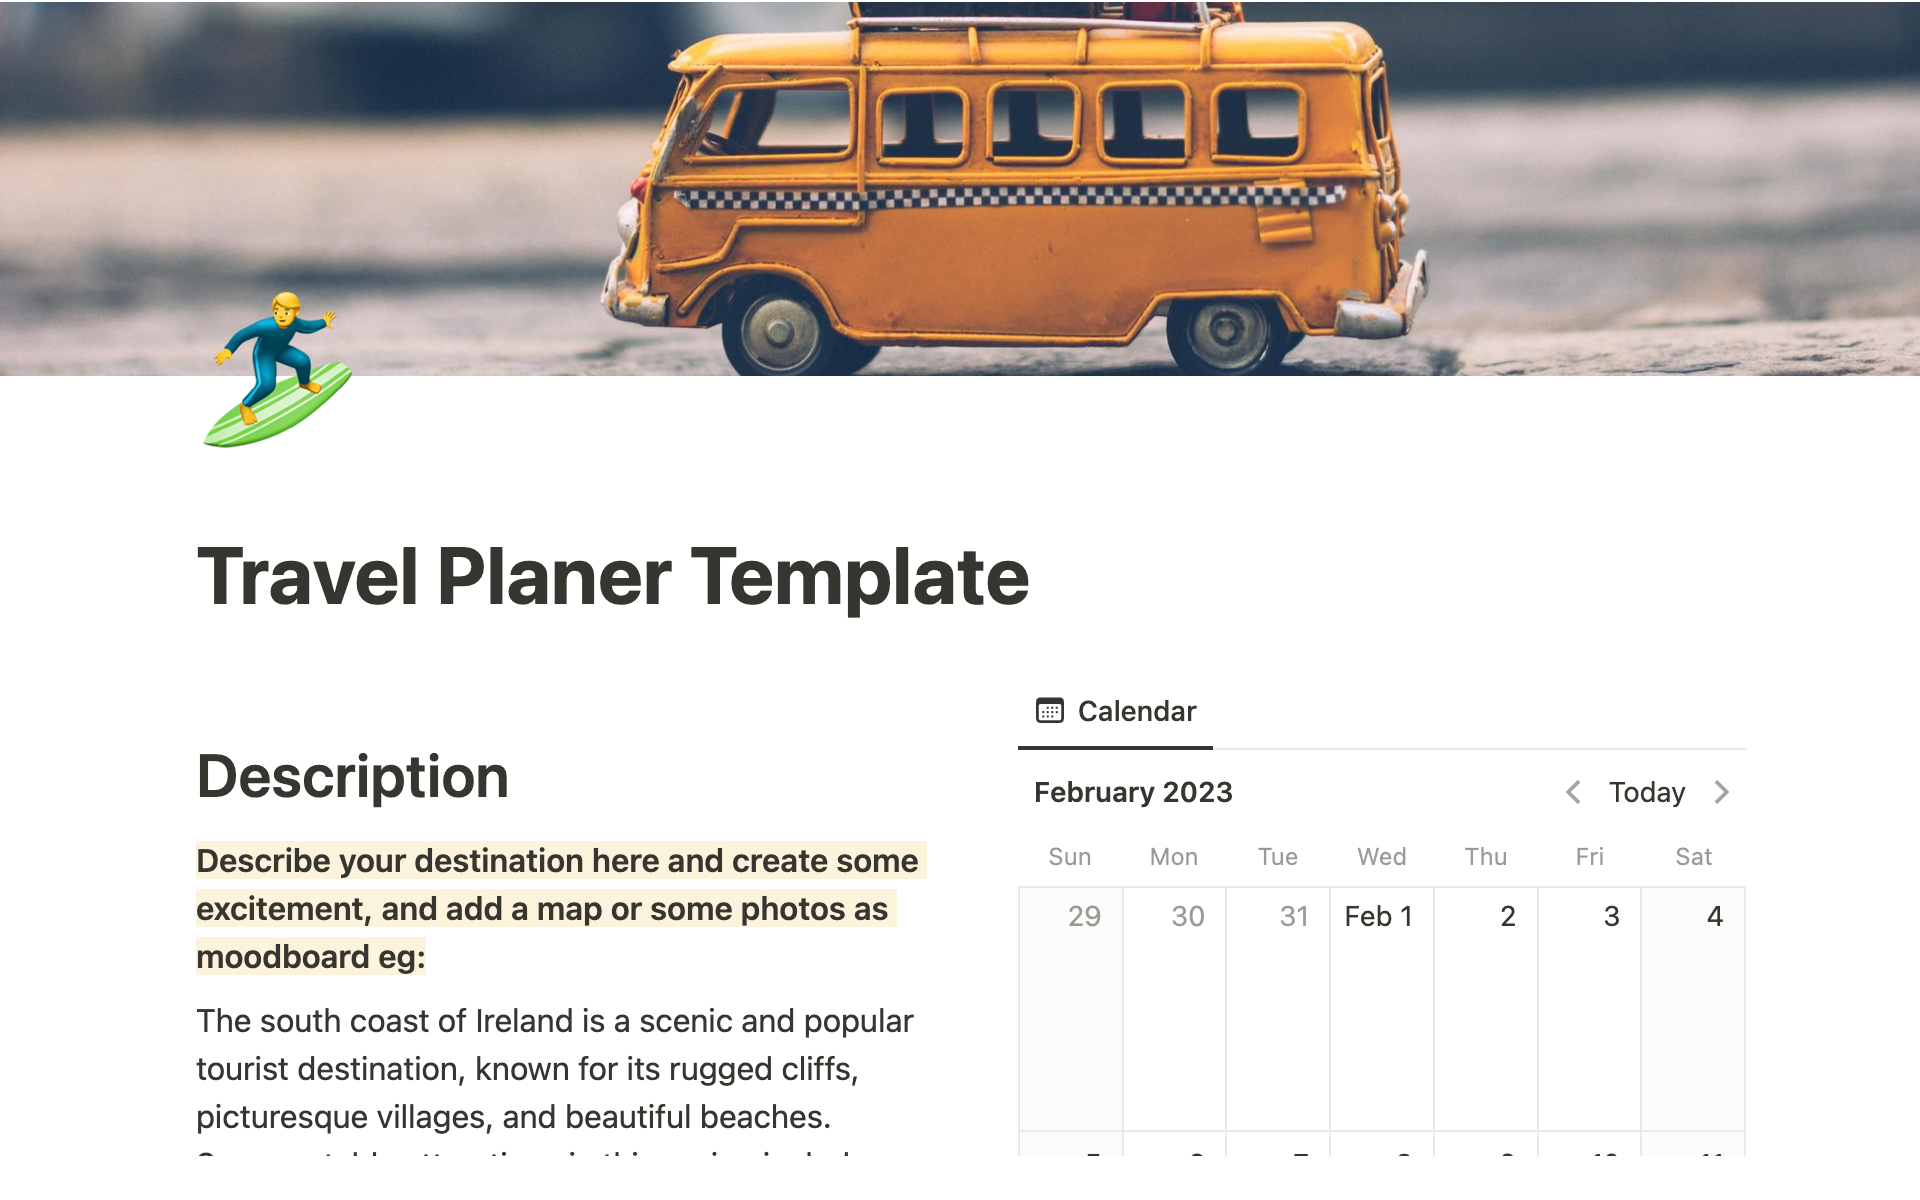 The travel planner template contains maps, pre-populated preparation and packing lists, a budget planner, and a daily activity and travel planner to help plan and organize a comprehensive and efficient trip.